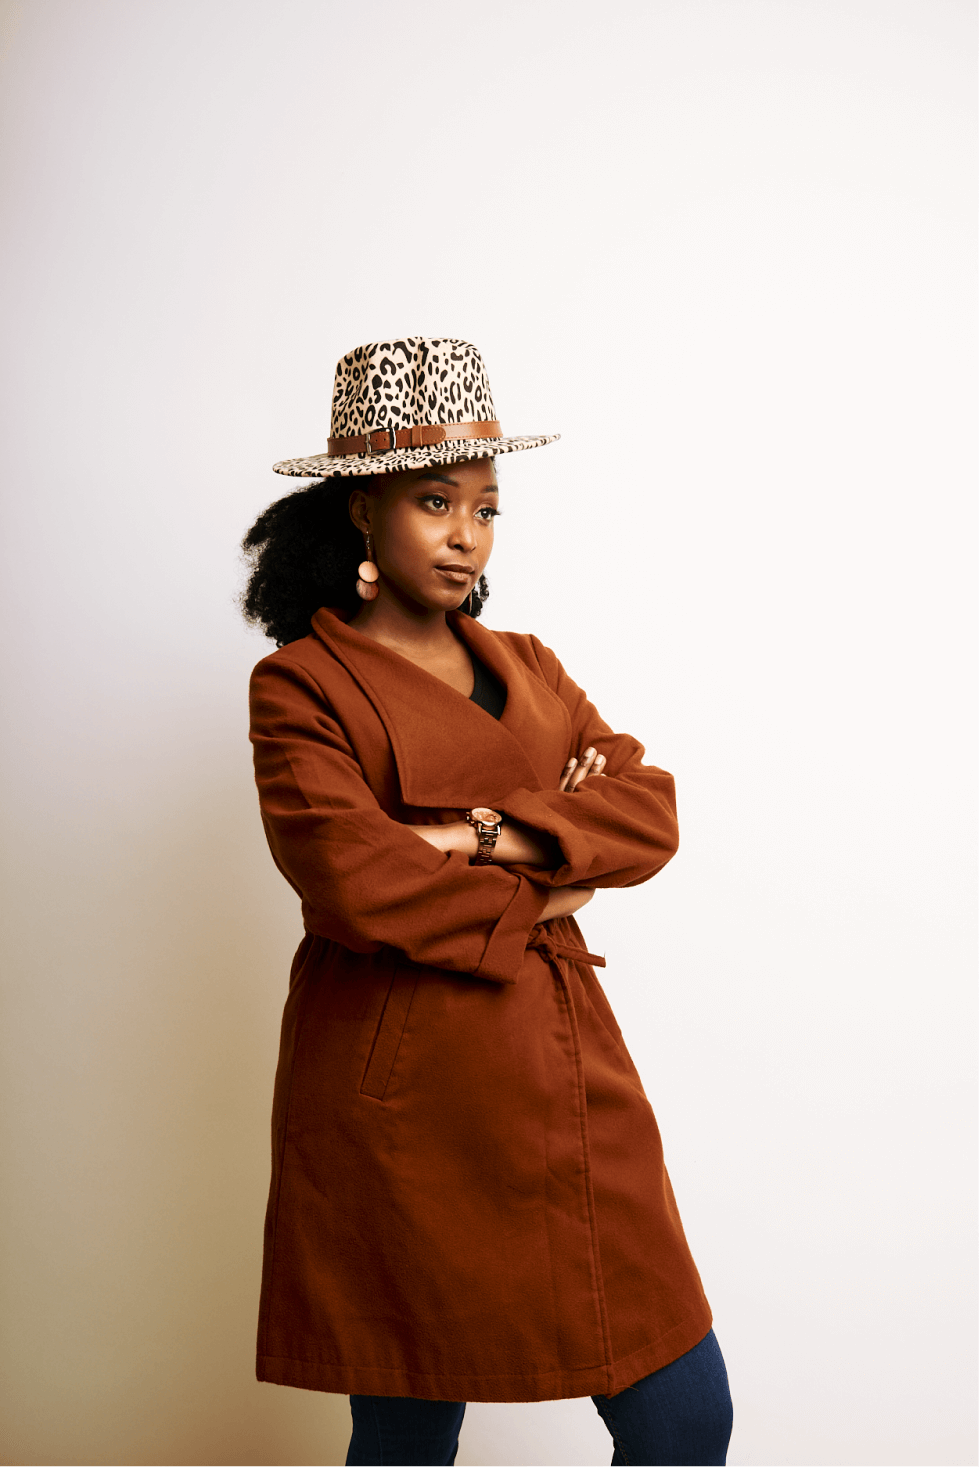 Shop Brown Wool Blend Jacket by The Fashion Frenzy on Arrai. Discover stylish, affordable clothing, jewelry, handbags and unique handmade pieces from top Kenyan & African fashion brands prioritising sustainability and quality craftsmanship.